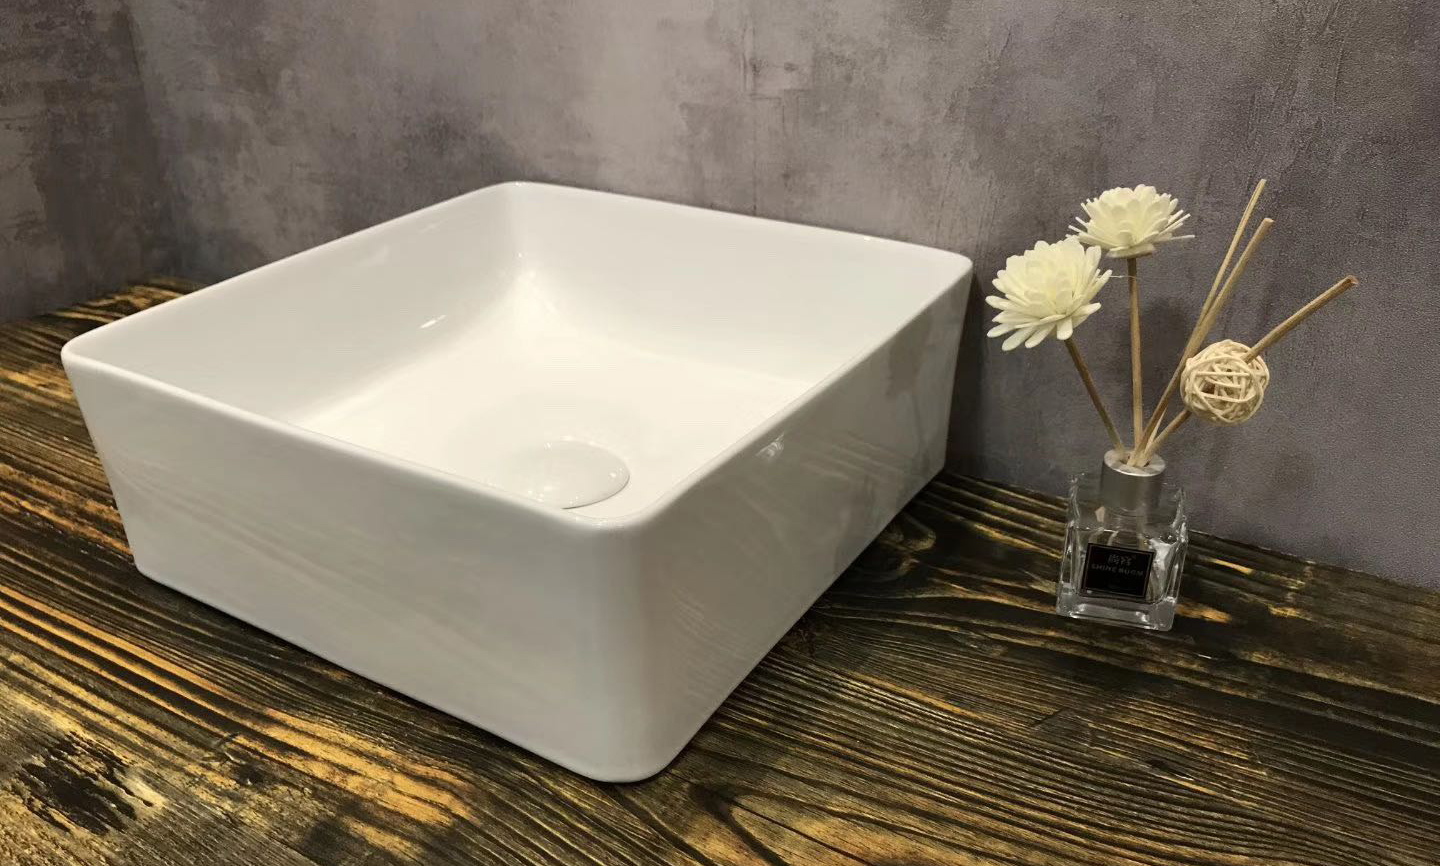 The versatility and variety of squared washbasins